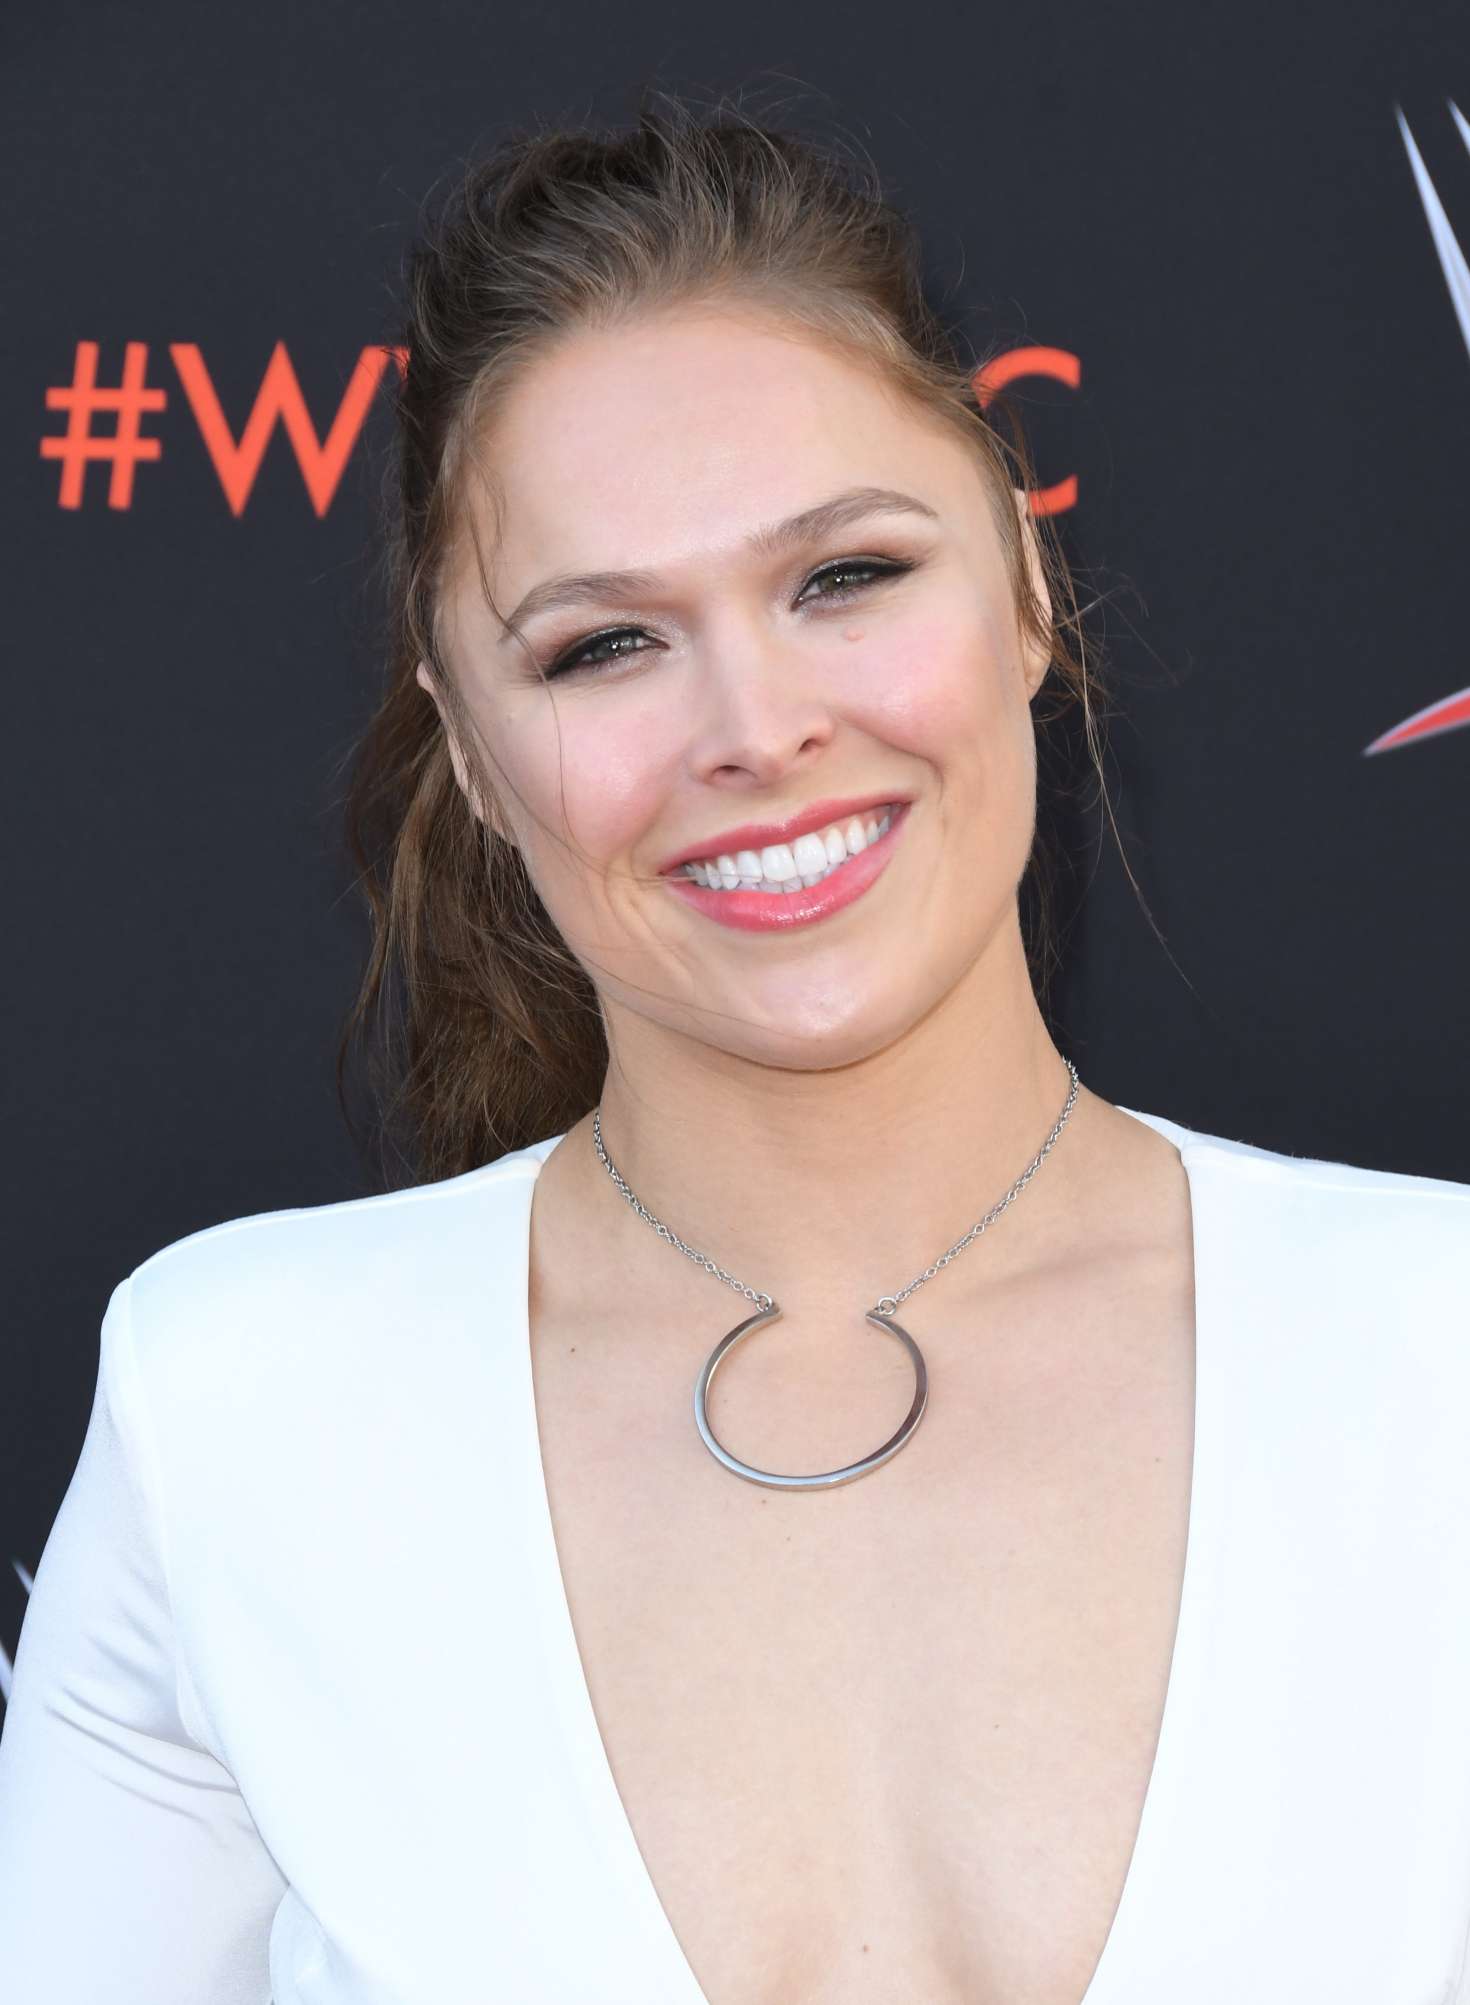 Ronda Rousey â€“ WWE FYC Event in Los Angeles